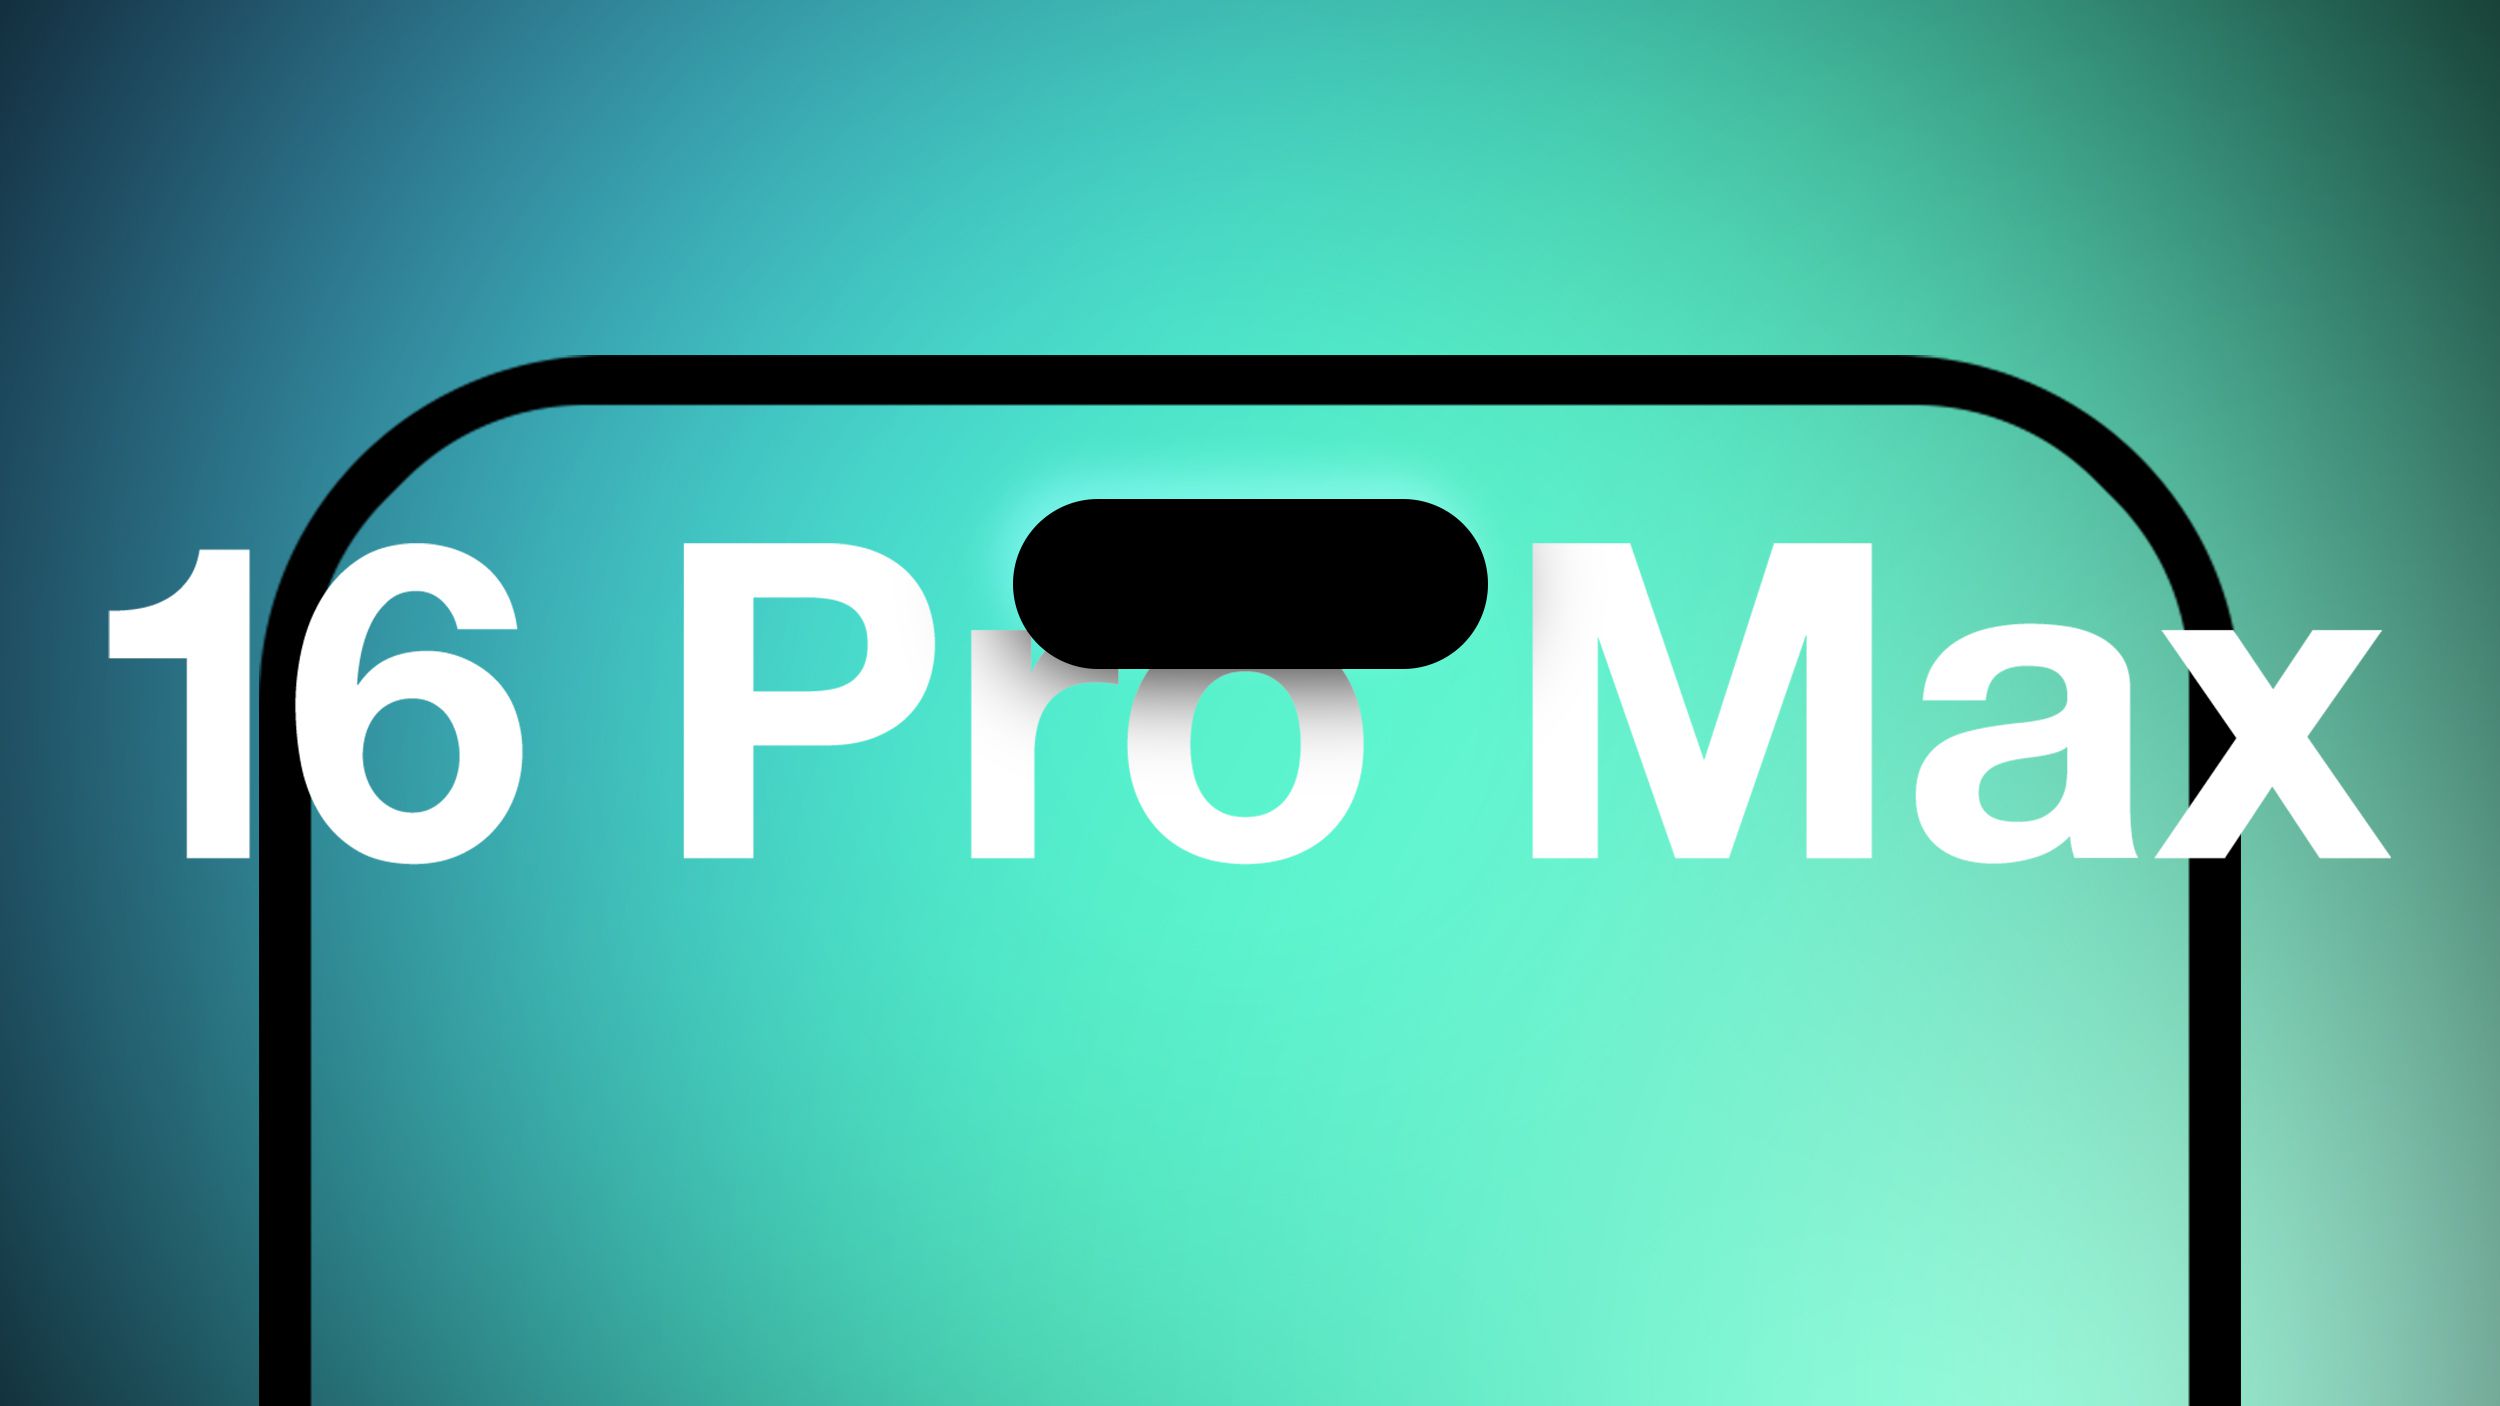 5 Biggest Changes Rumored for iPhone 16 Pro Max